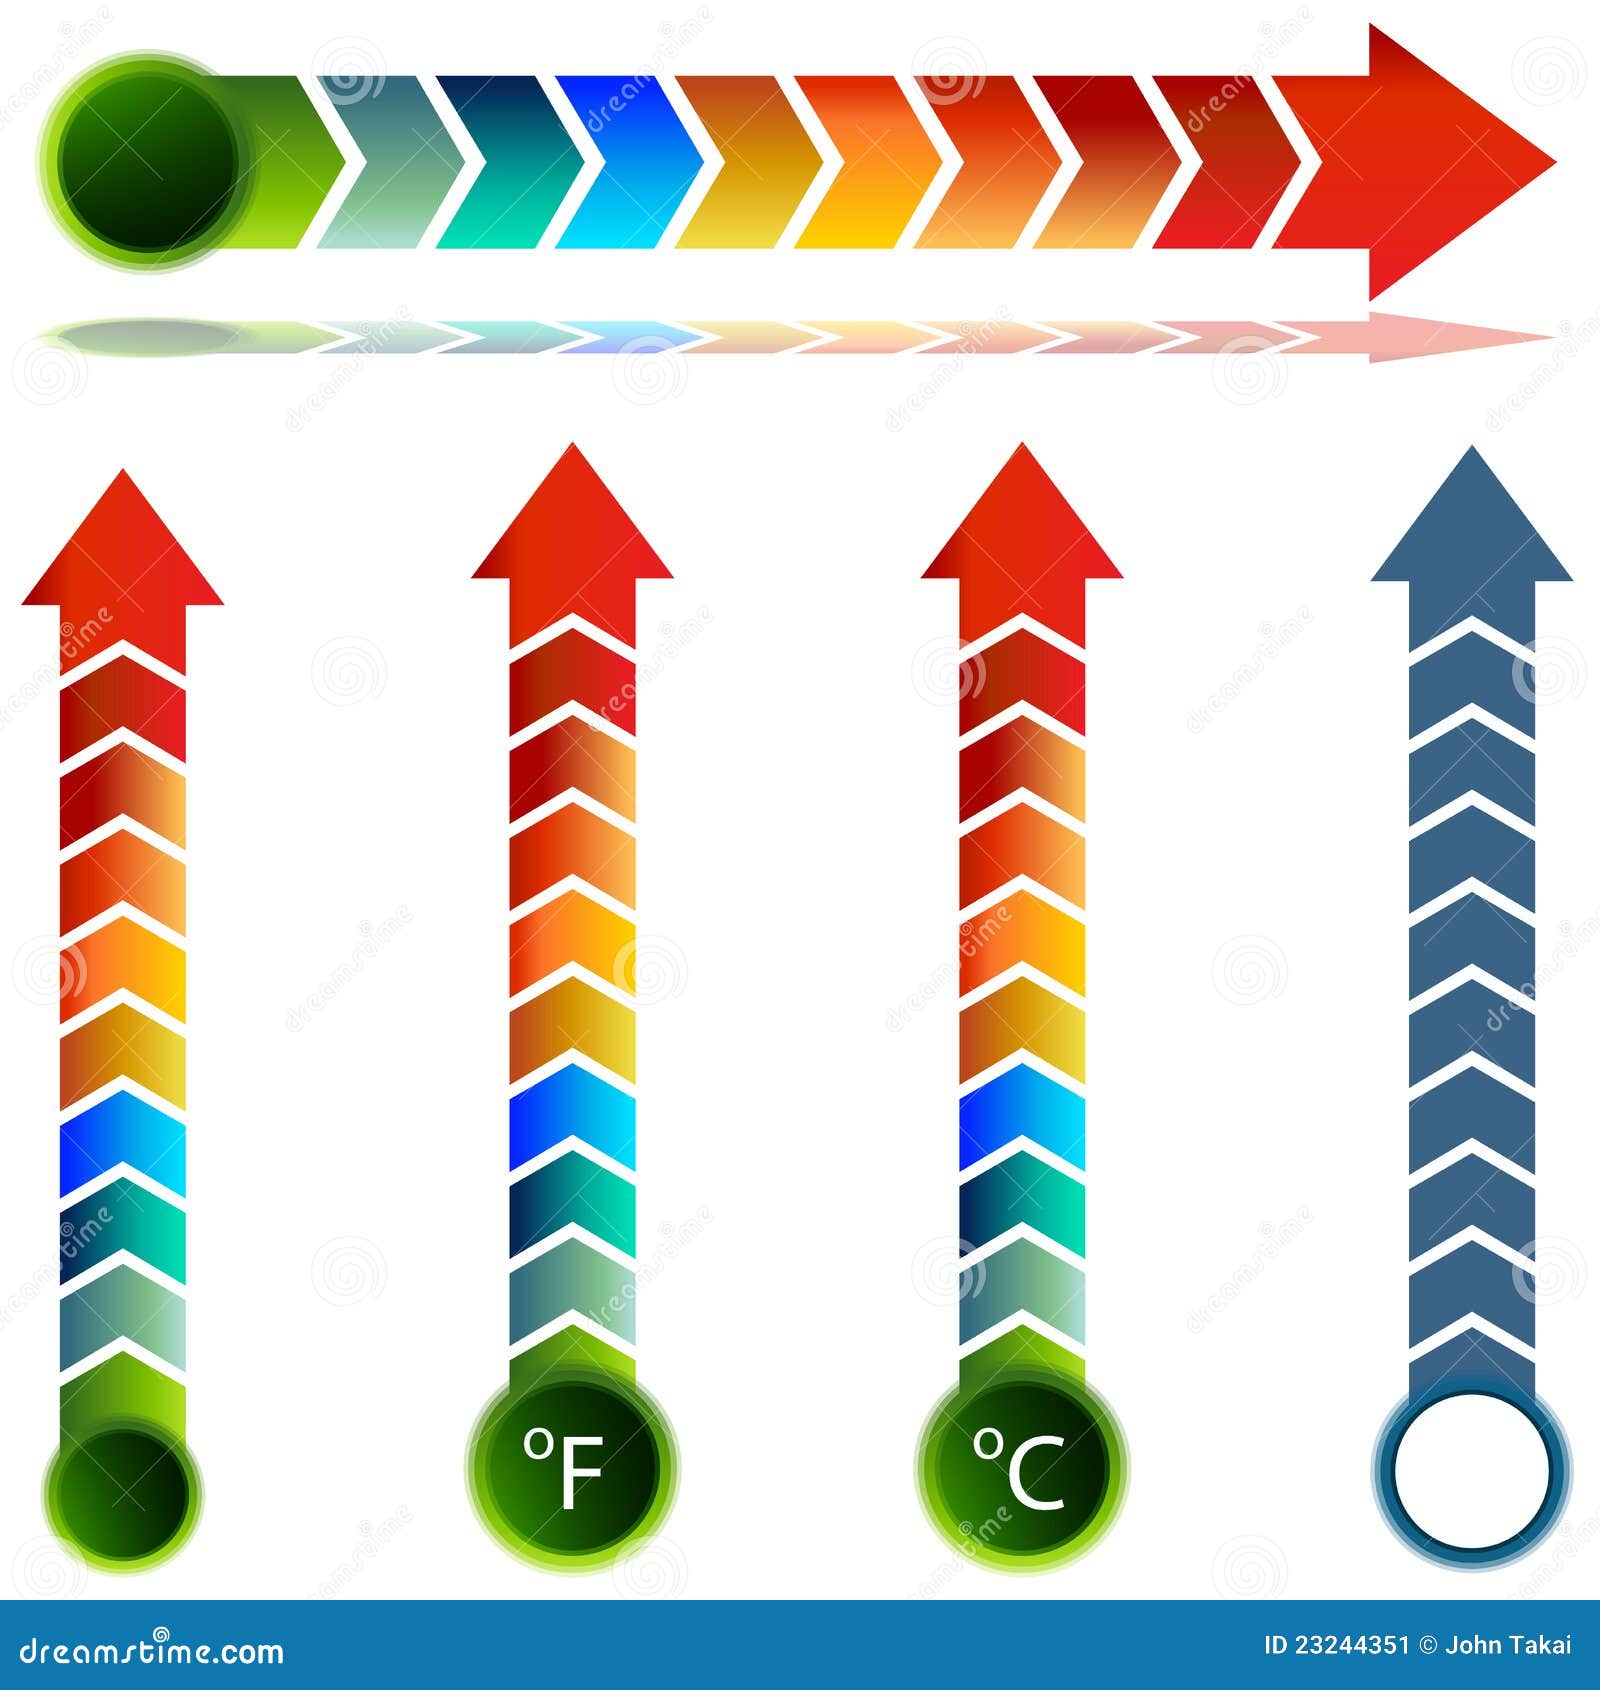 https://thumbs.dreamstime.com/z/thermometer-temperature-arrow-set-23244351.jpg